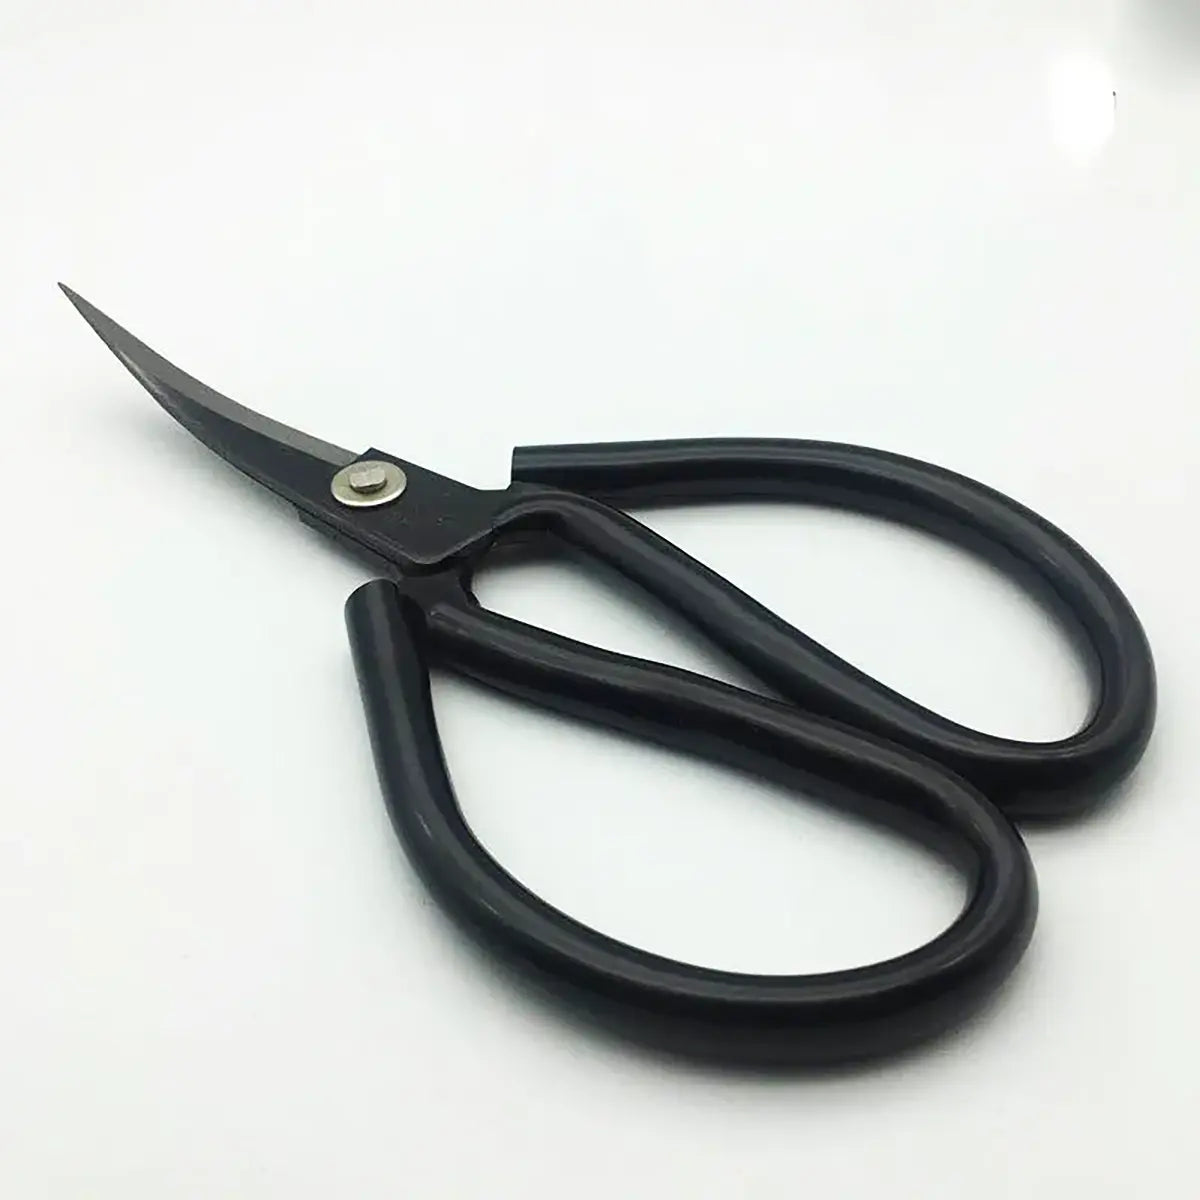 Large Elbow Leather Shears